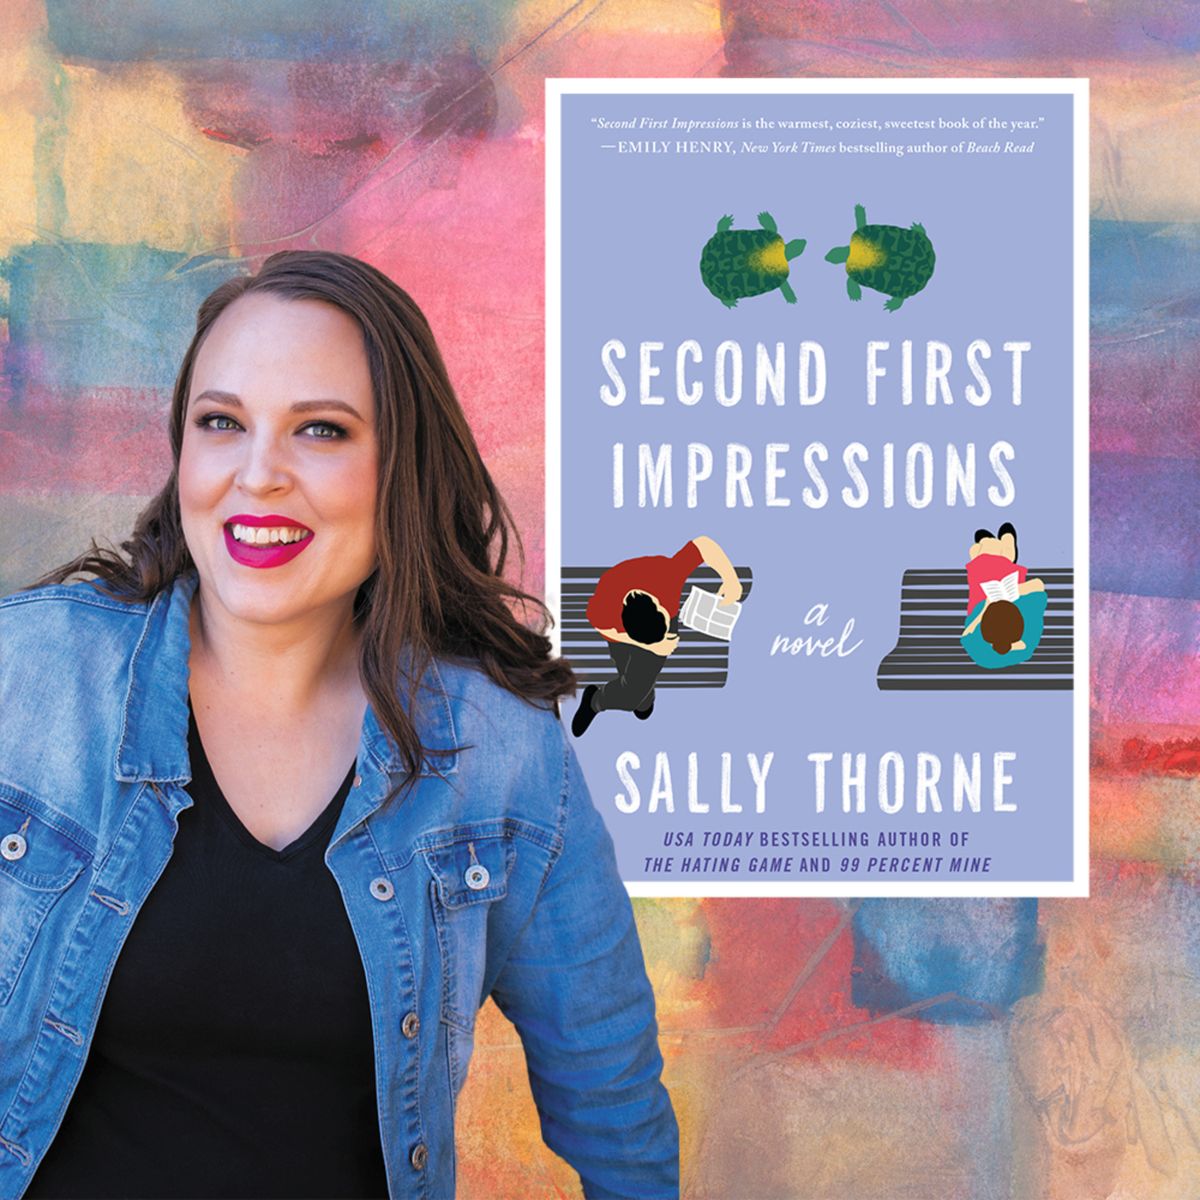 sally thorne, author of second first impression